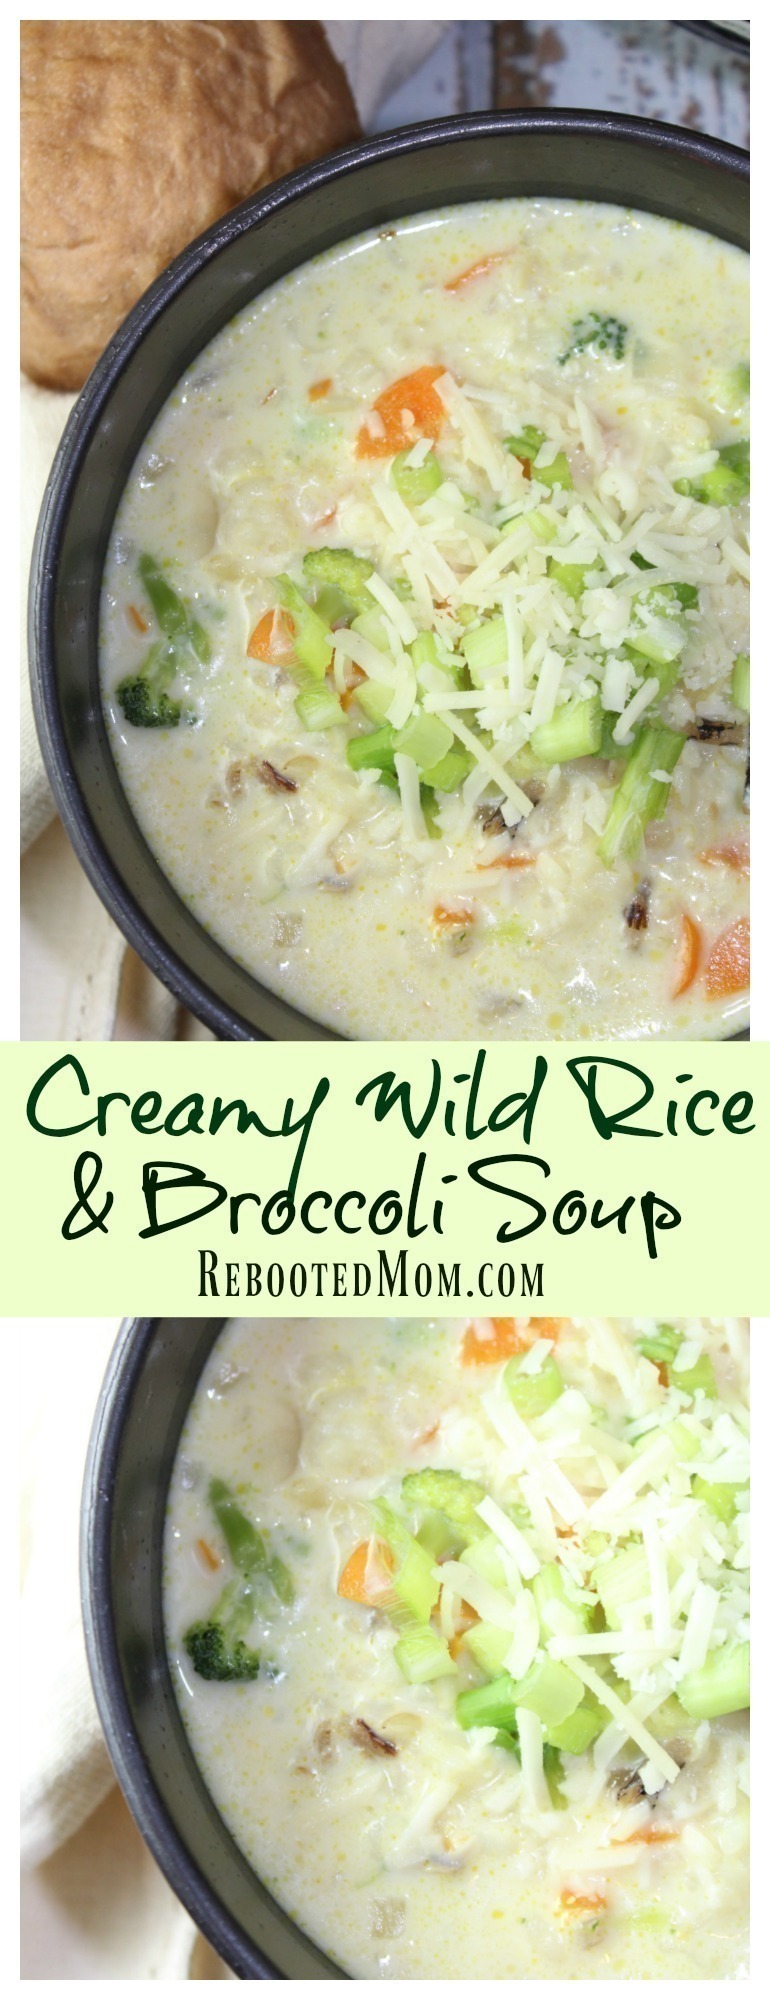 Combine carrots, onions, broccoli, and wild rice in a creamy soup that is effortless to make!